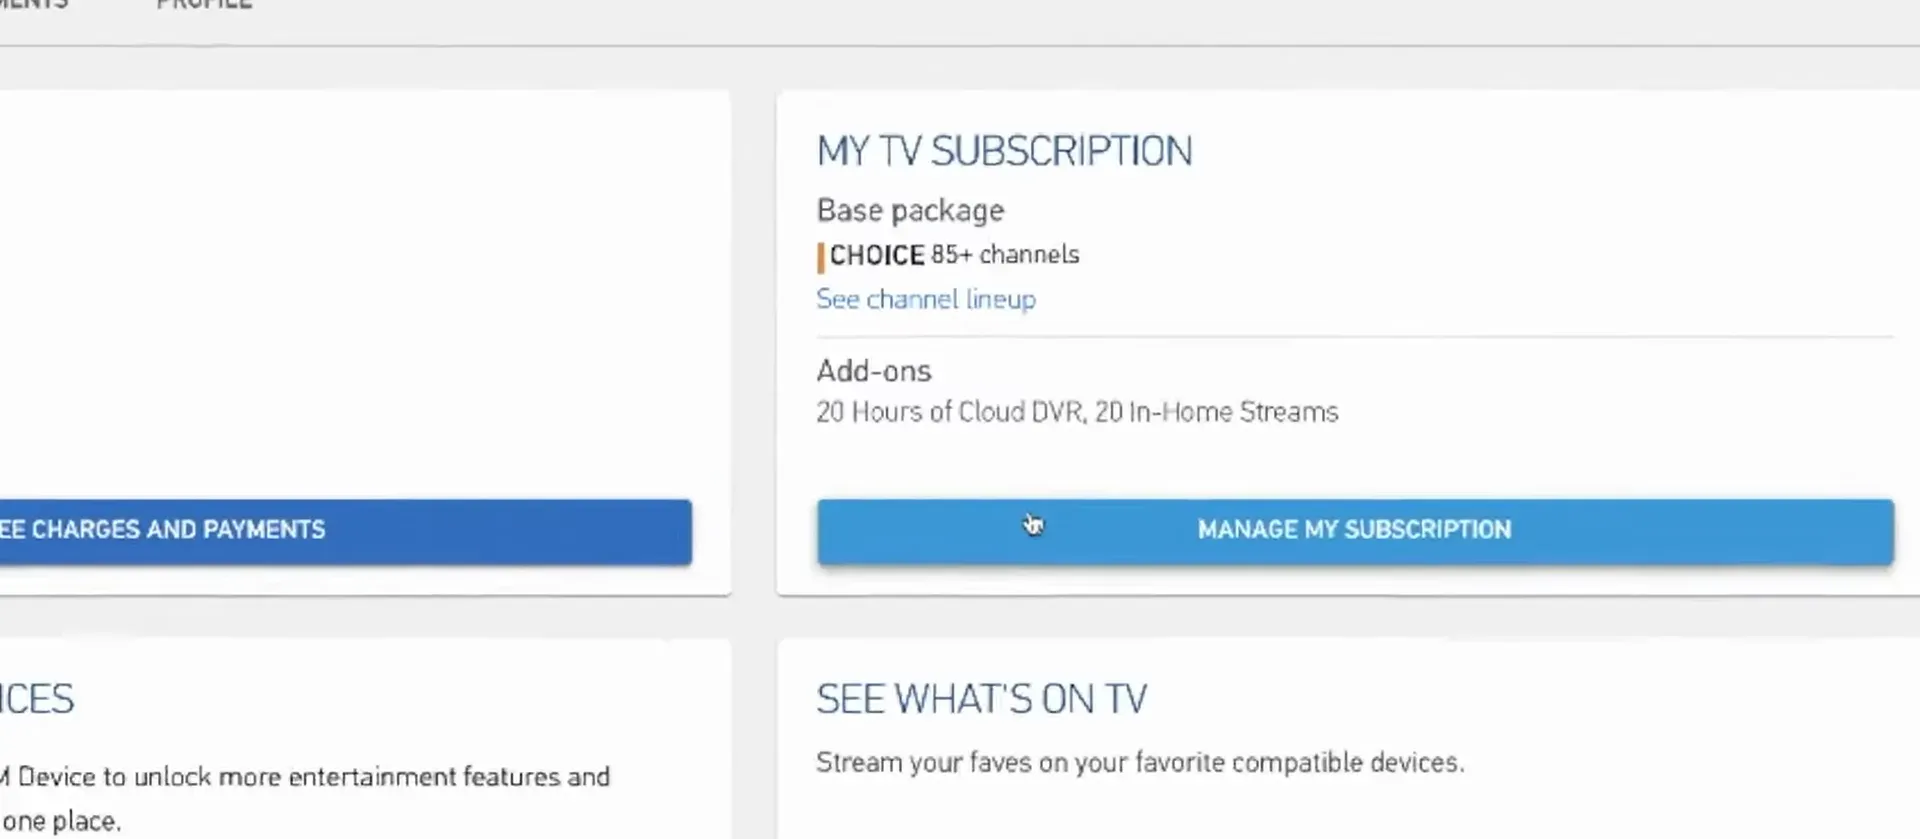 manage subscription at&t tv.webp